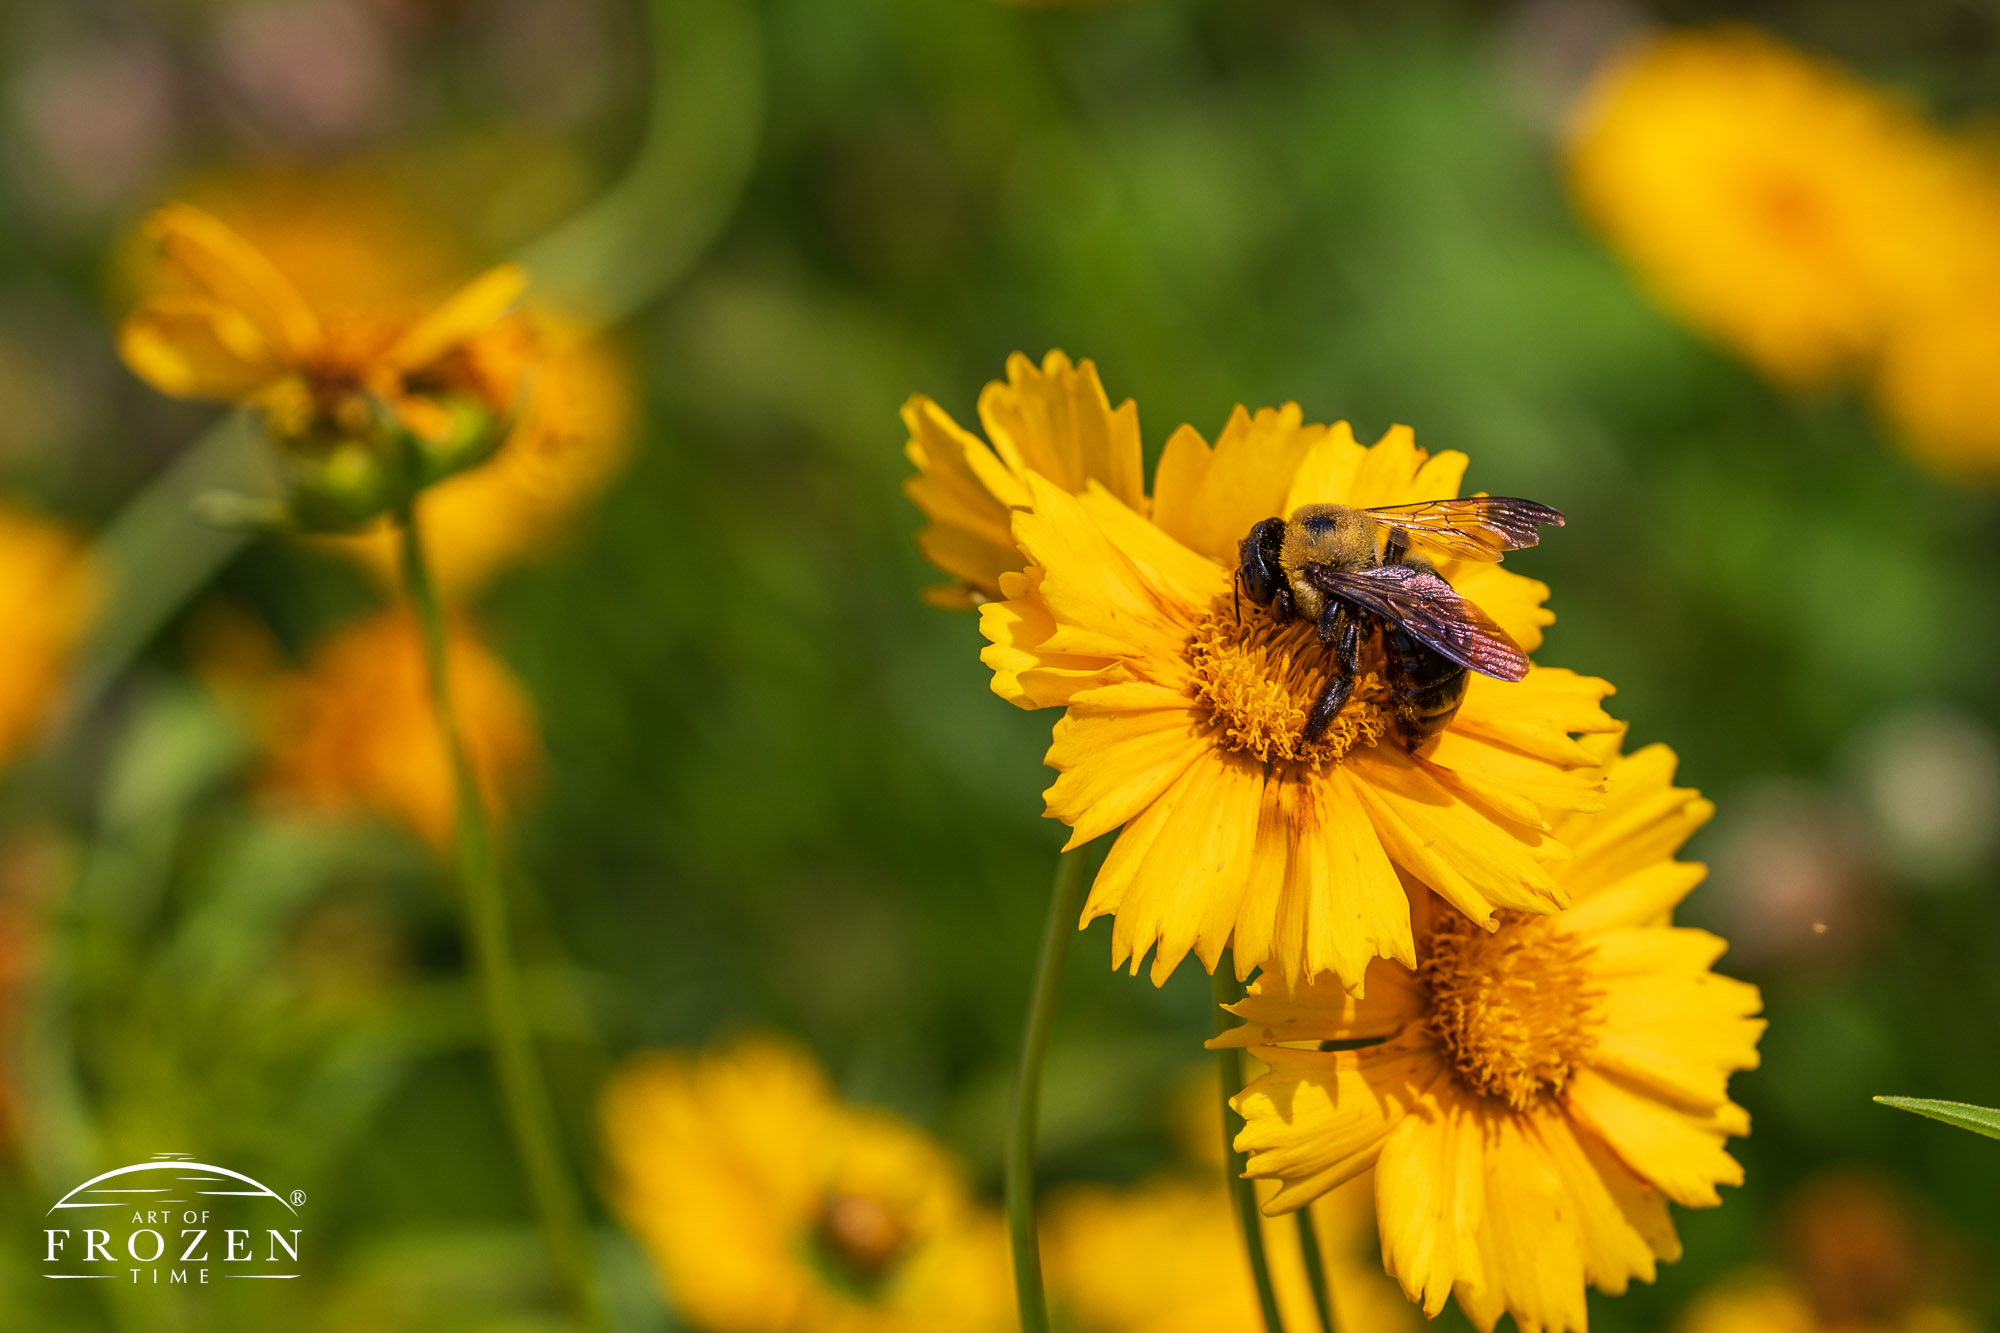 A bee pollinating a bright yellow lance-leaf coreopsis where one sees fine hairs on its head and shiny abdomen reflects the sky.